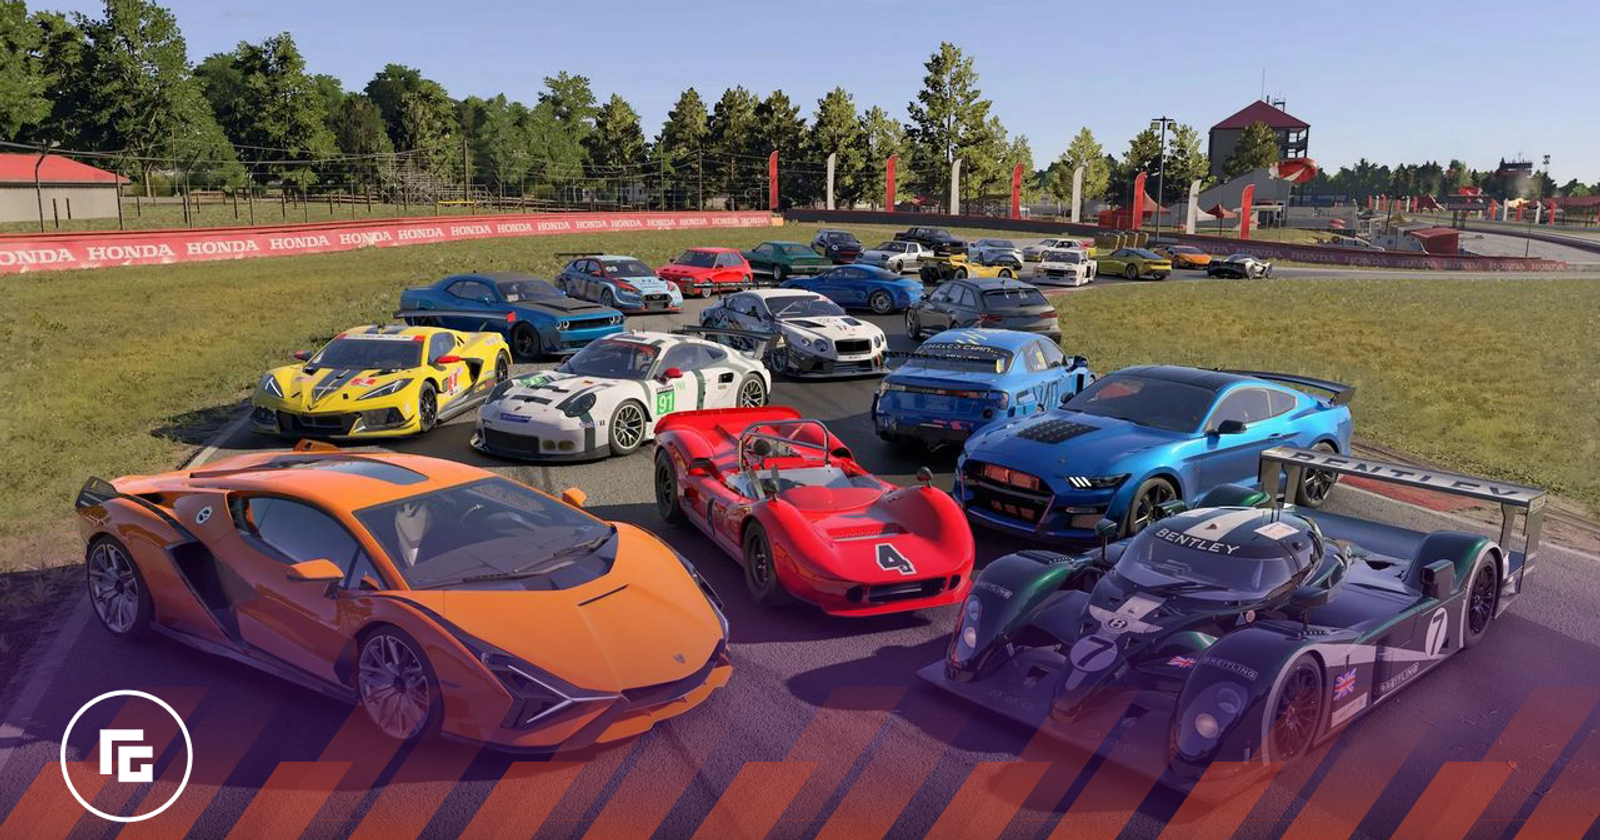 Forza Horizon 5 File Size is By Far the Series' Largest, Players Can  Preload Now